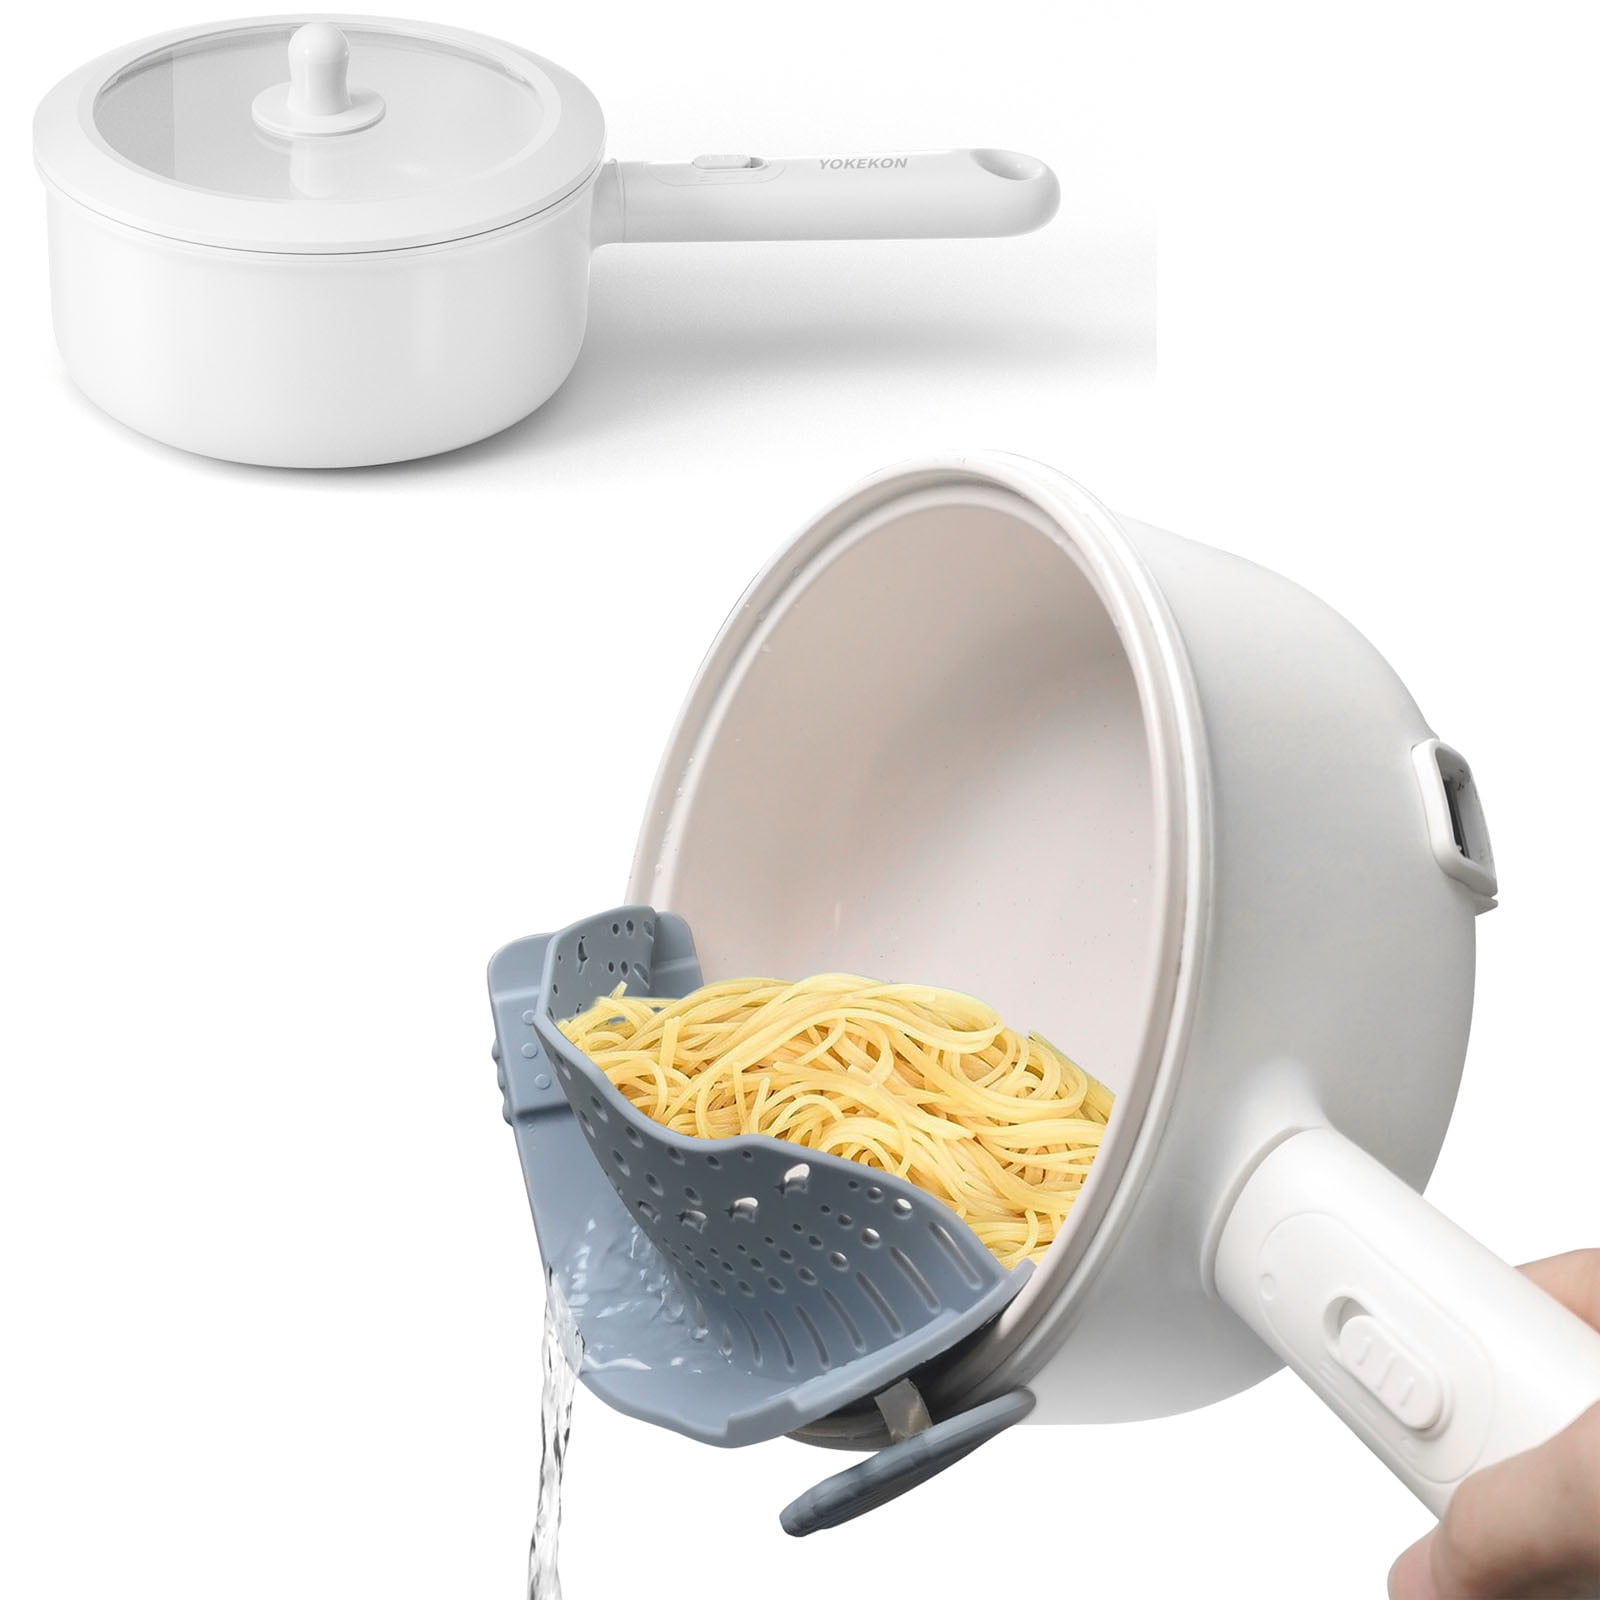 New Multifunctional Electric Heating Pot Electric Boiling Pot Household  Low-Power Hot Pot Non-Stick Coating Cooking Pot (28CM)